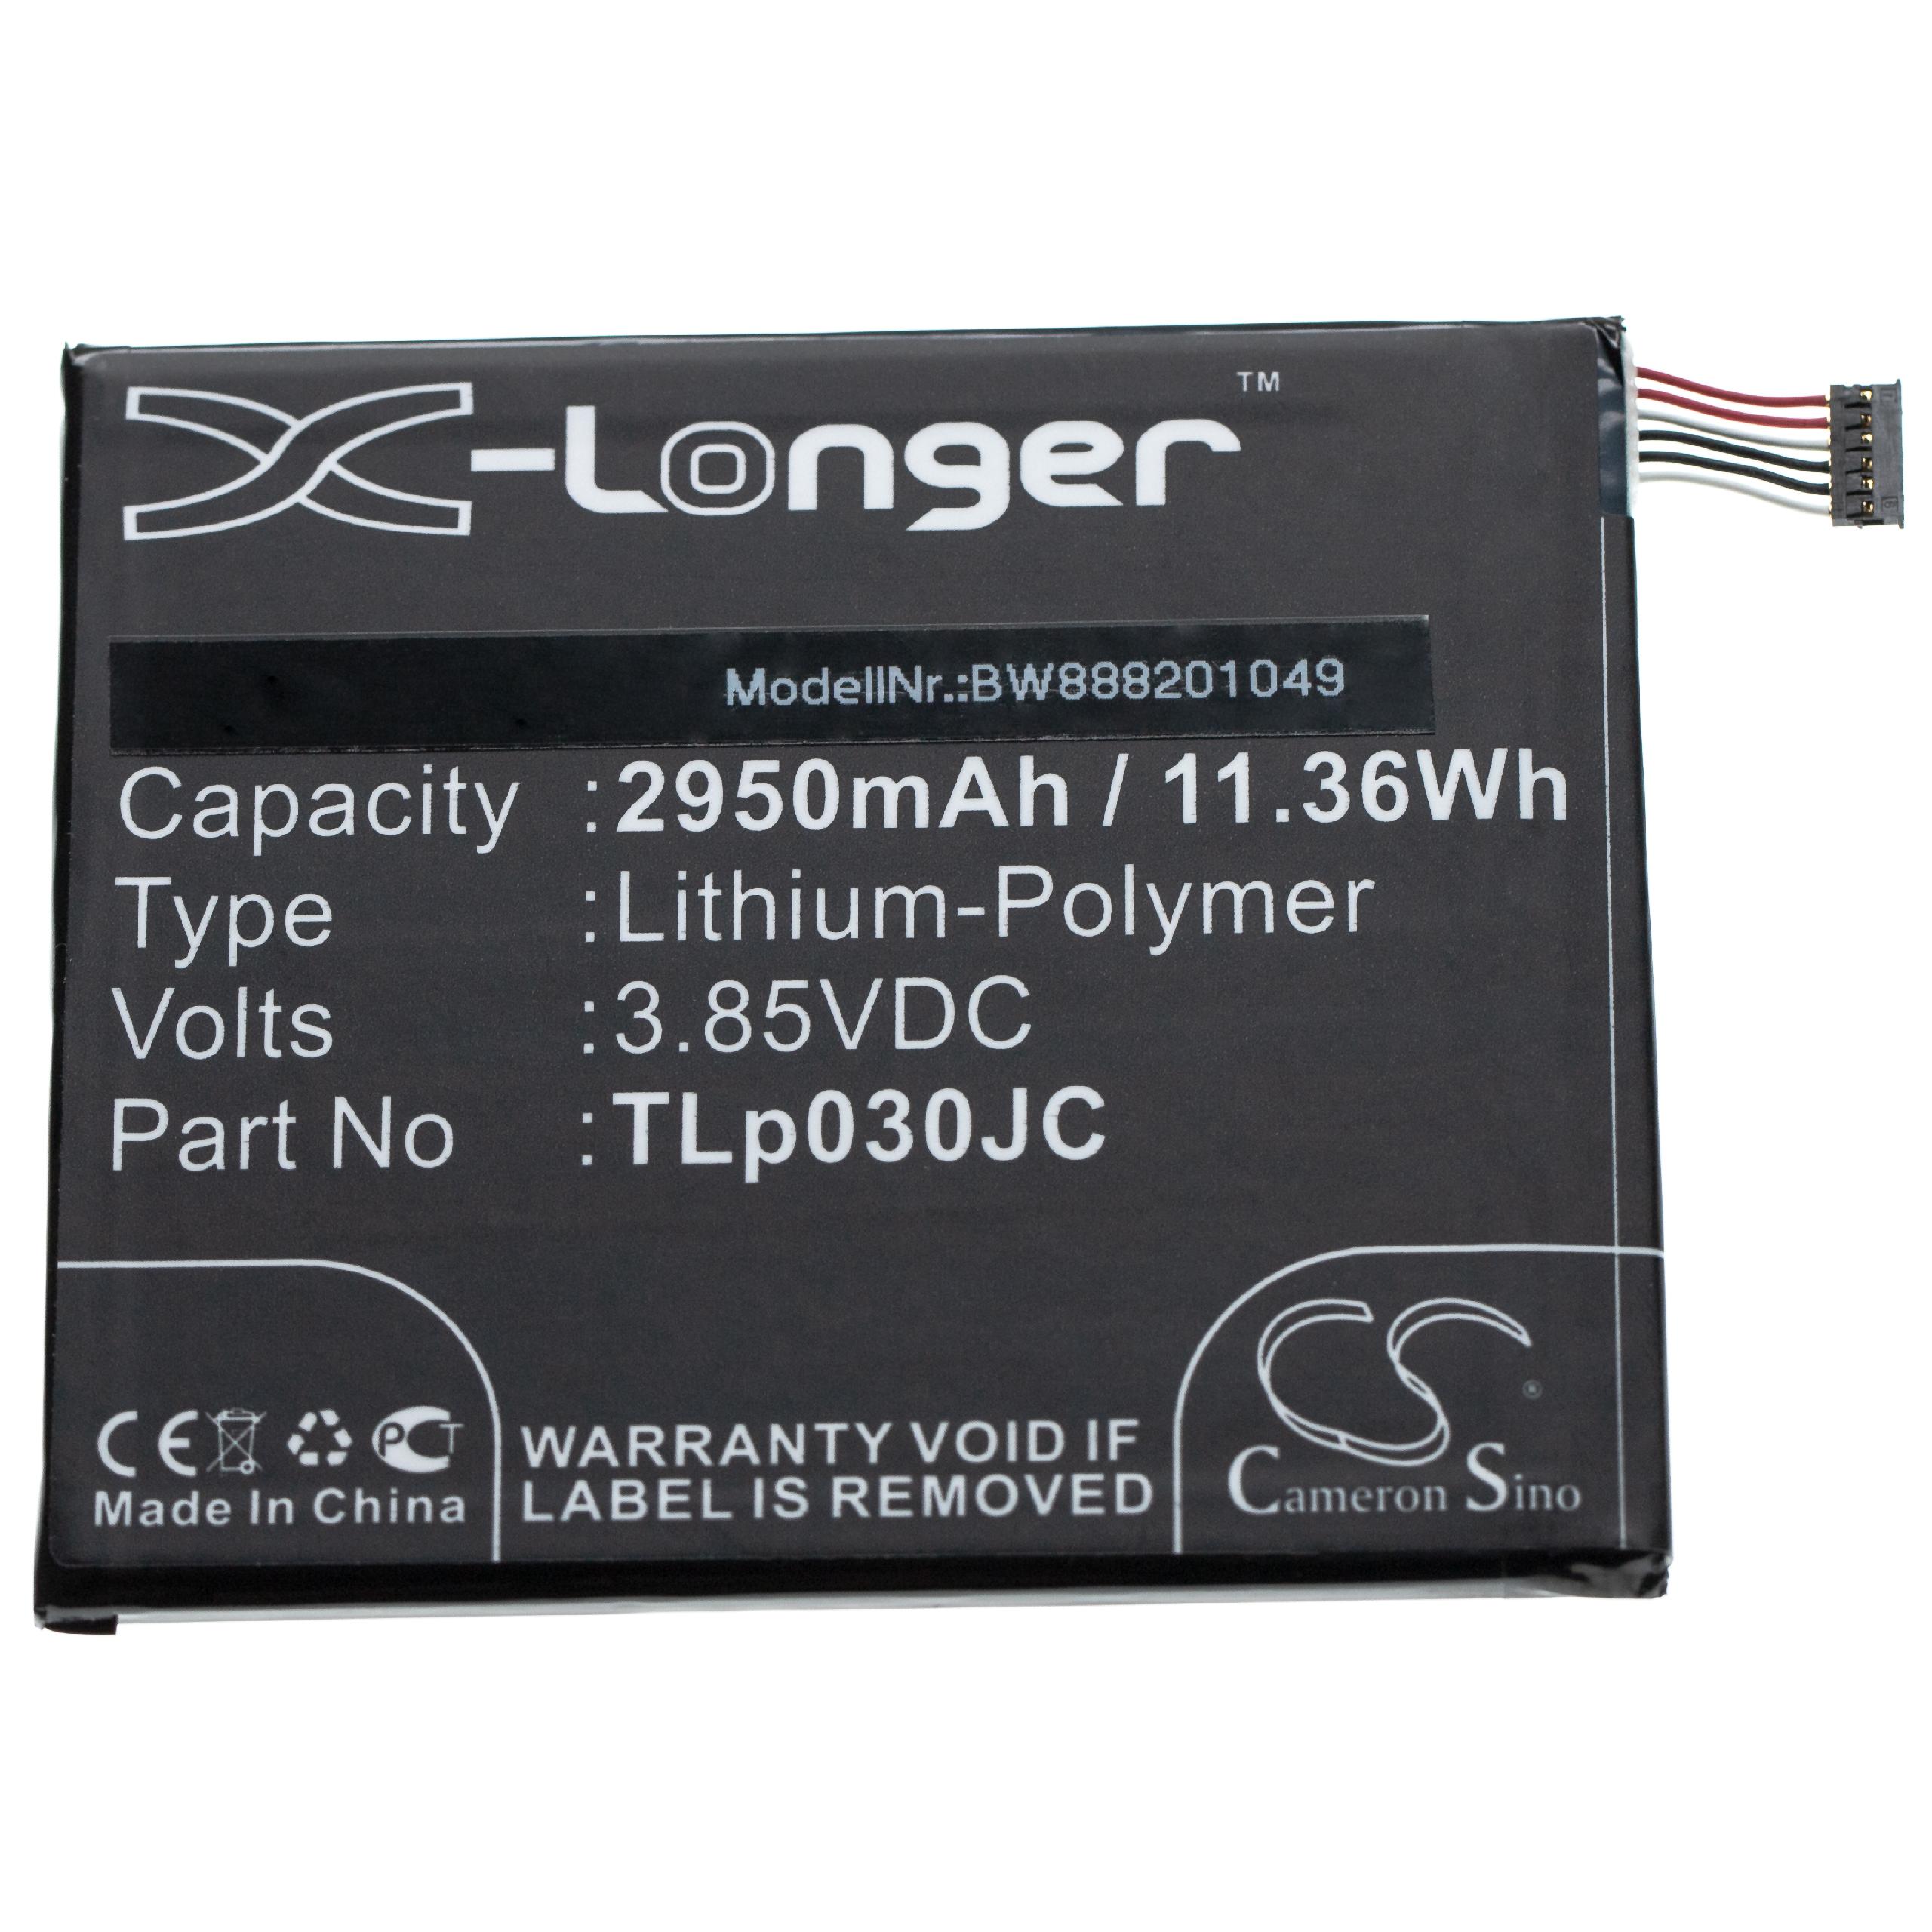 Mobile Phone Battery Replacement for Alcatel CAC3000034CC, TLp030JC - 2950mAh 3.85V Li-Ion